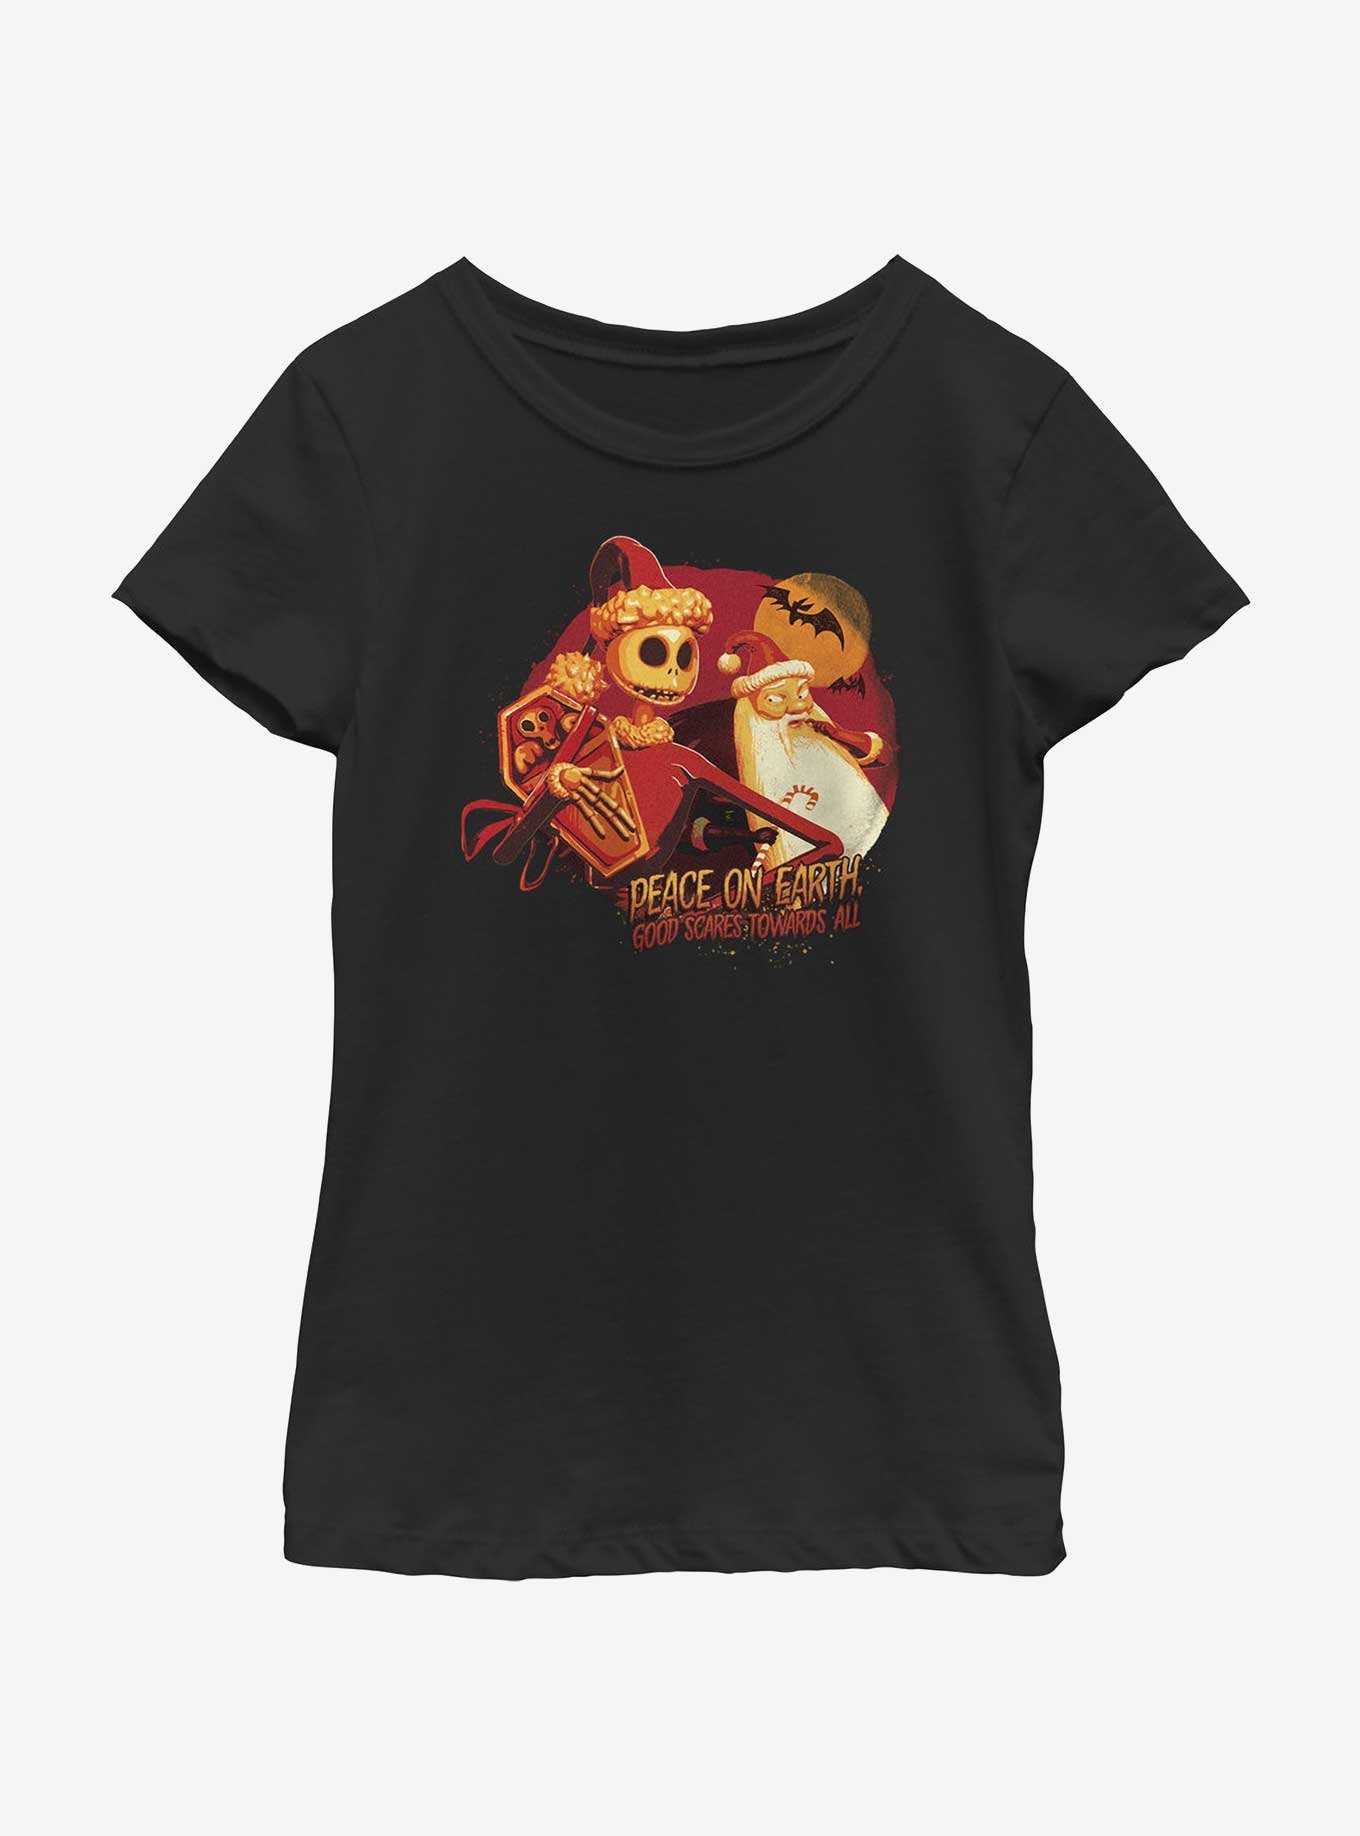 Disney Nightmare Before Christmas Good Scares Towards All Youth Girls T-Shirt, , hi-res